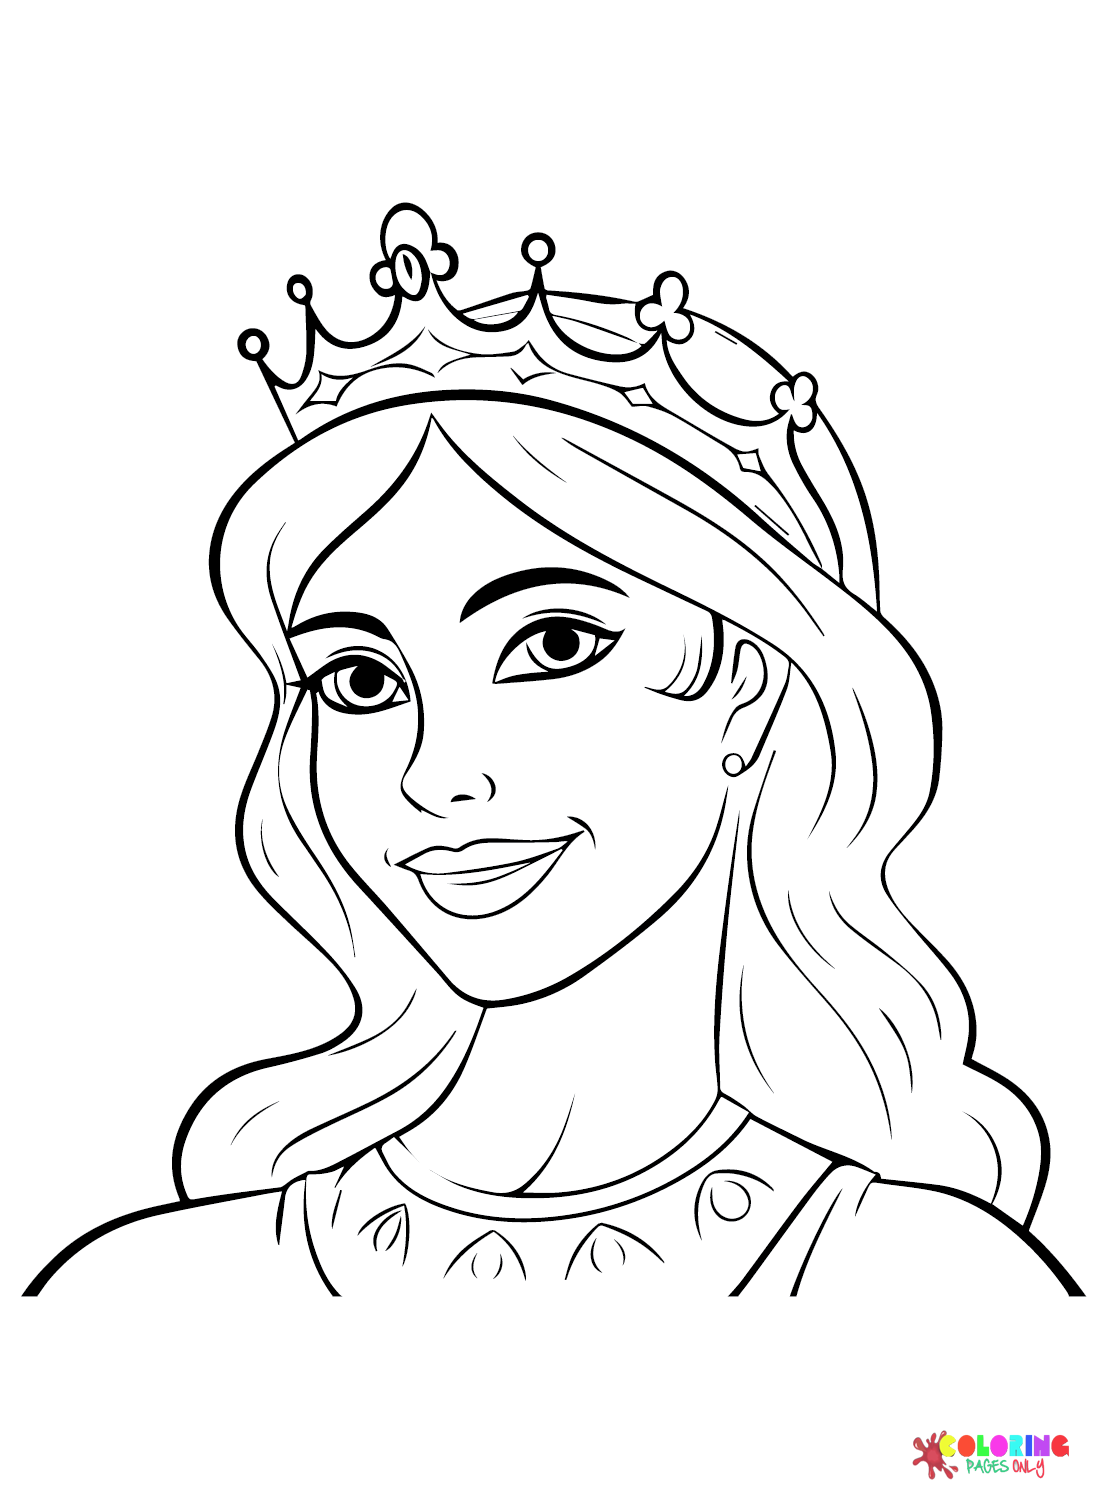 Smiling Queen Coloring Page